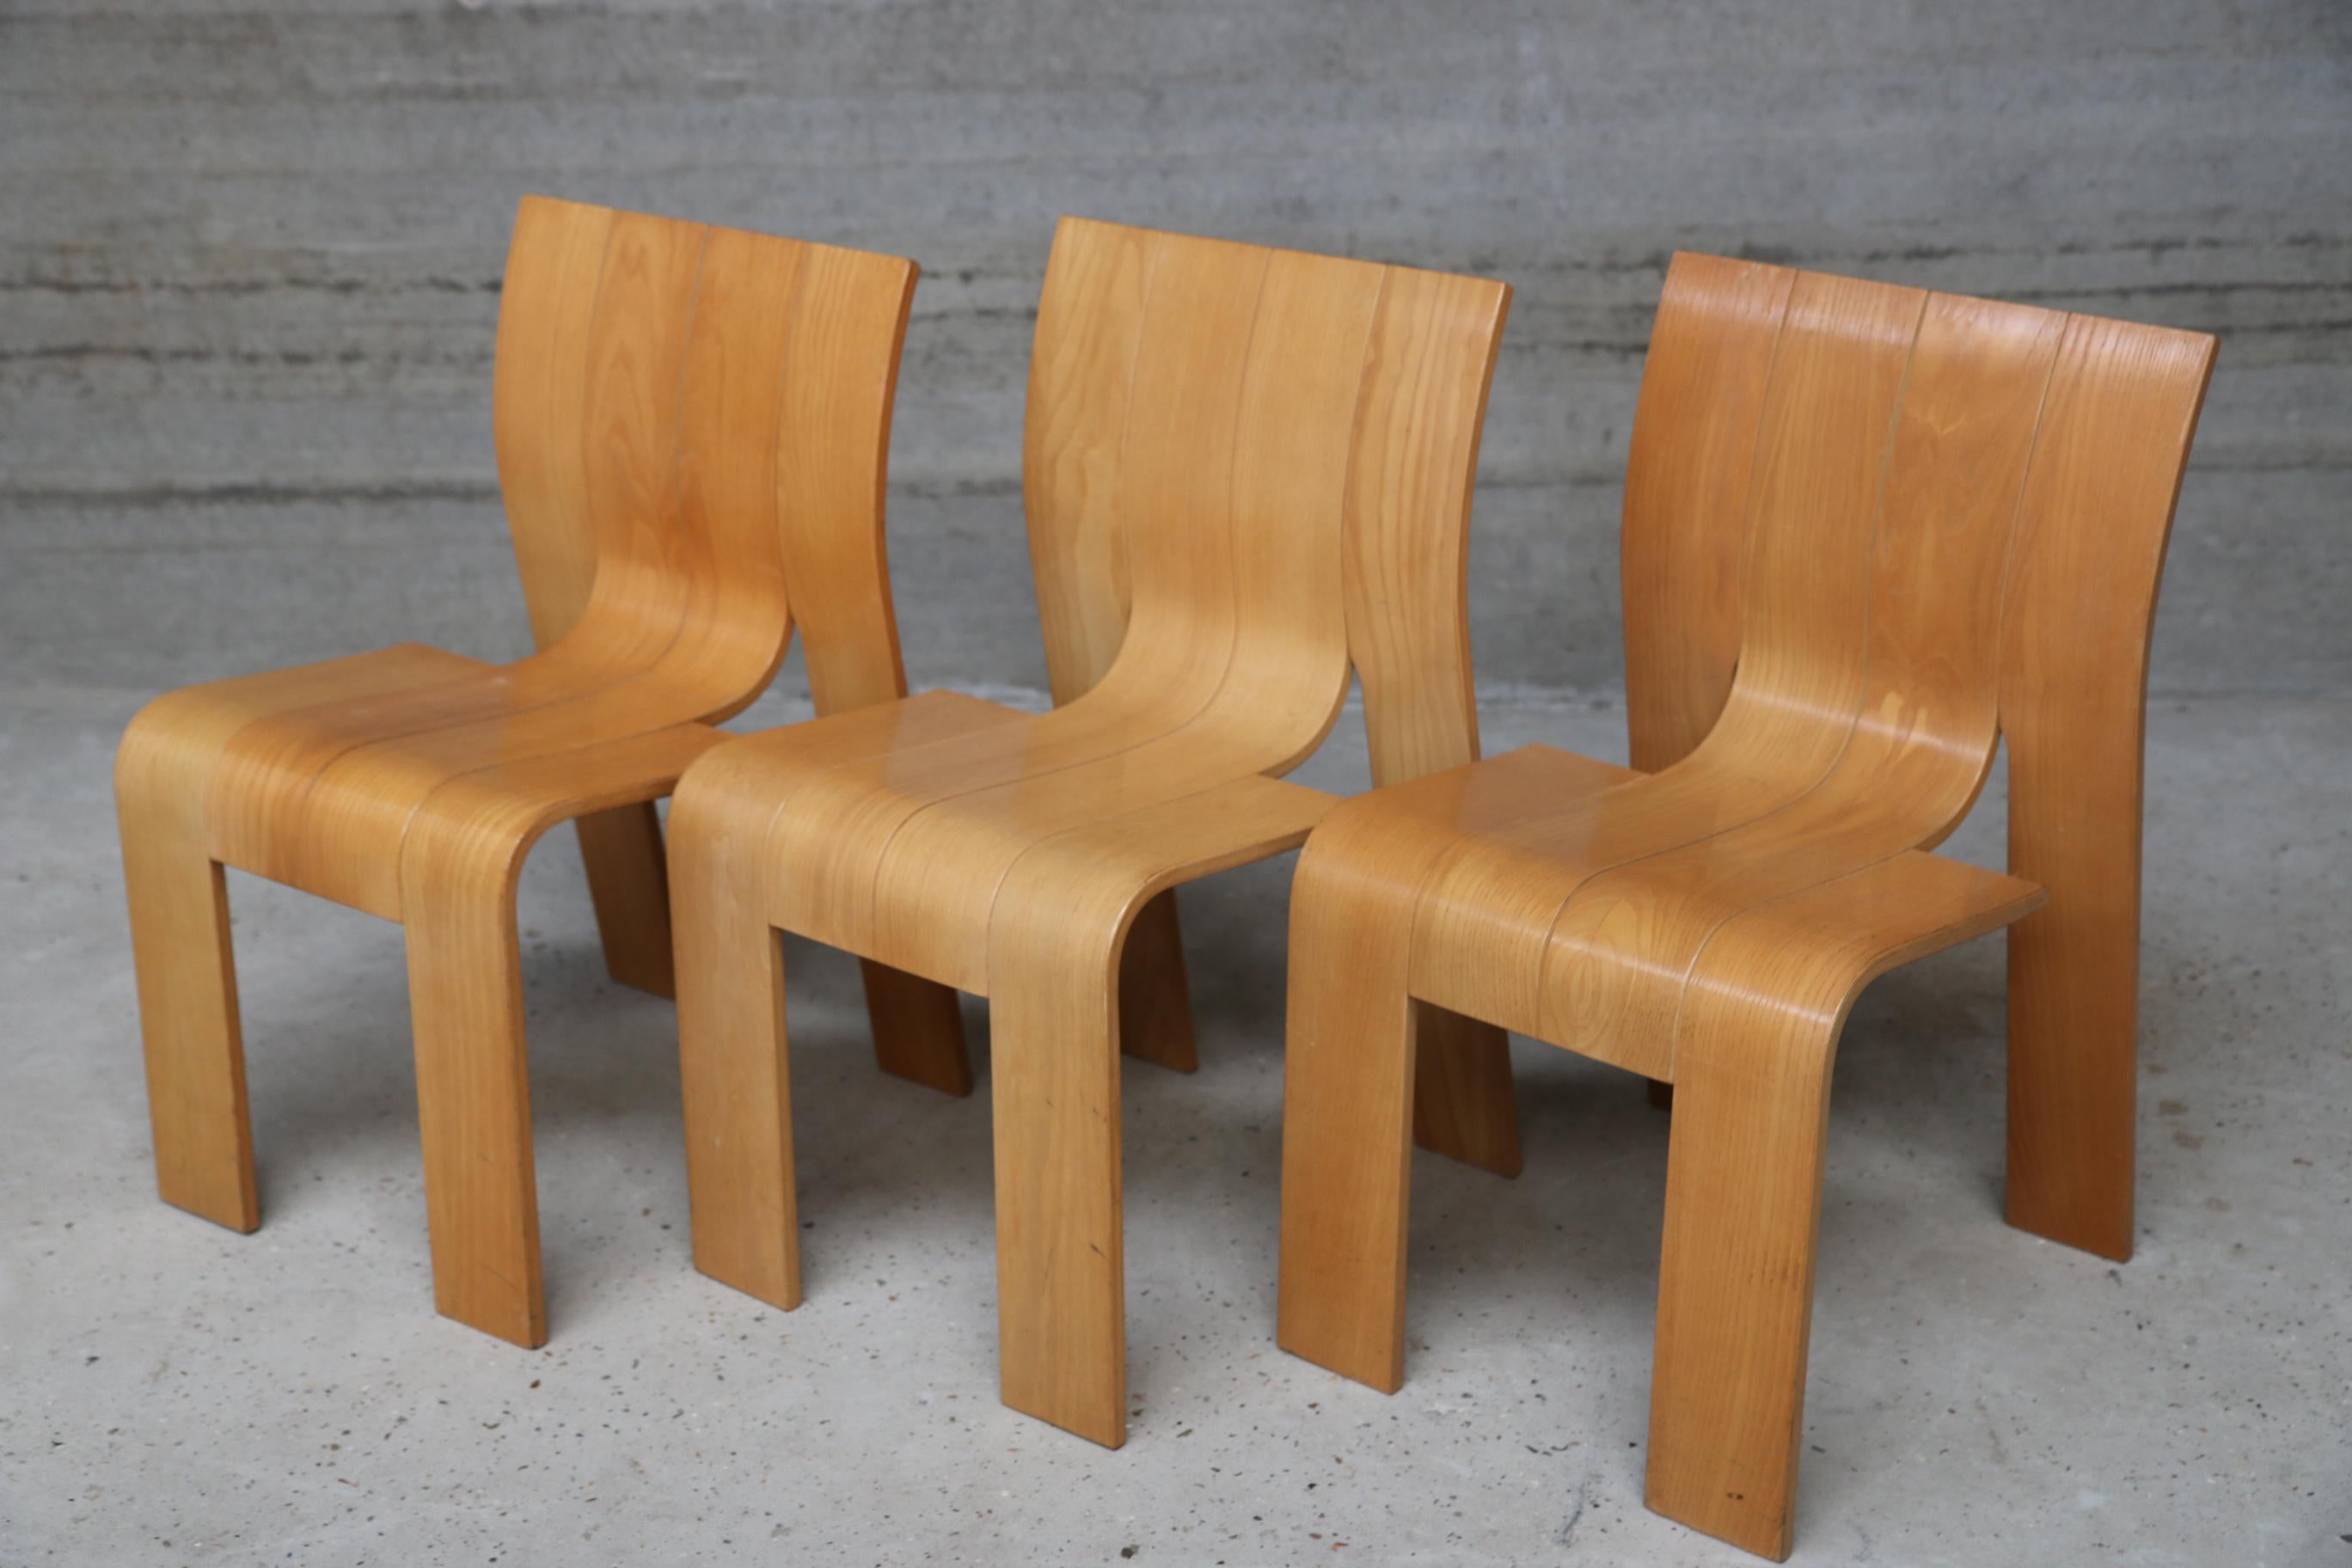 Strip chair design Gijs Bakker for Castellijn, 1974 Dutch
Laminated beech wood stackable chair. A chair without armrests. The chair is in an excellent vintage condition. Each chair is made of four strips of 11cm wide beechwood and. These strips are